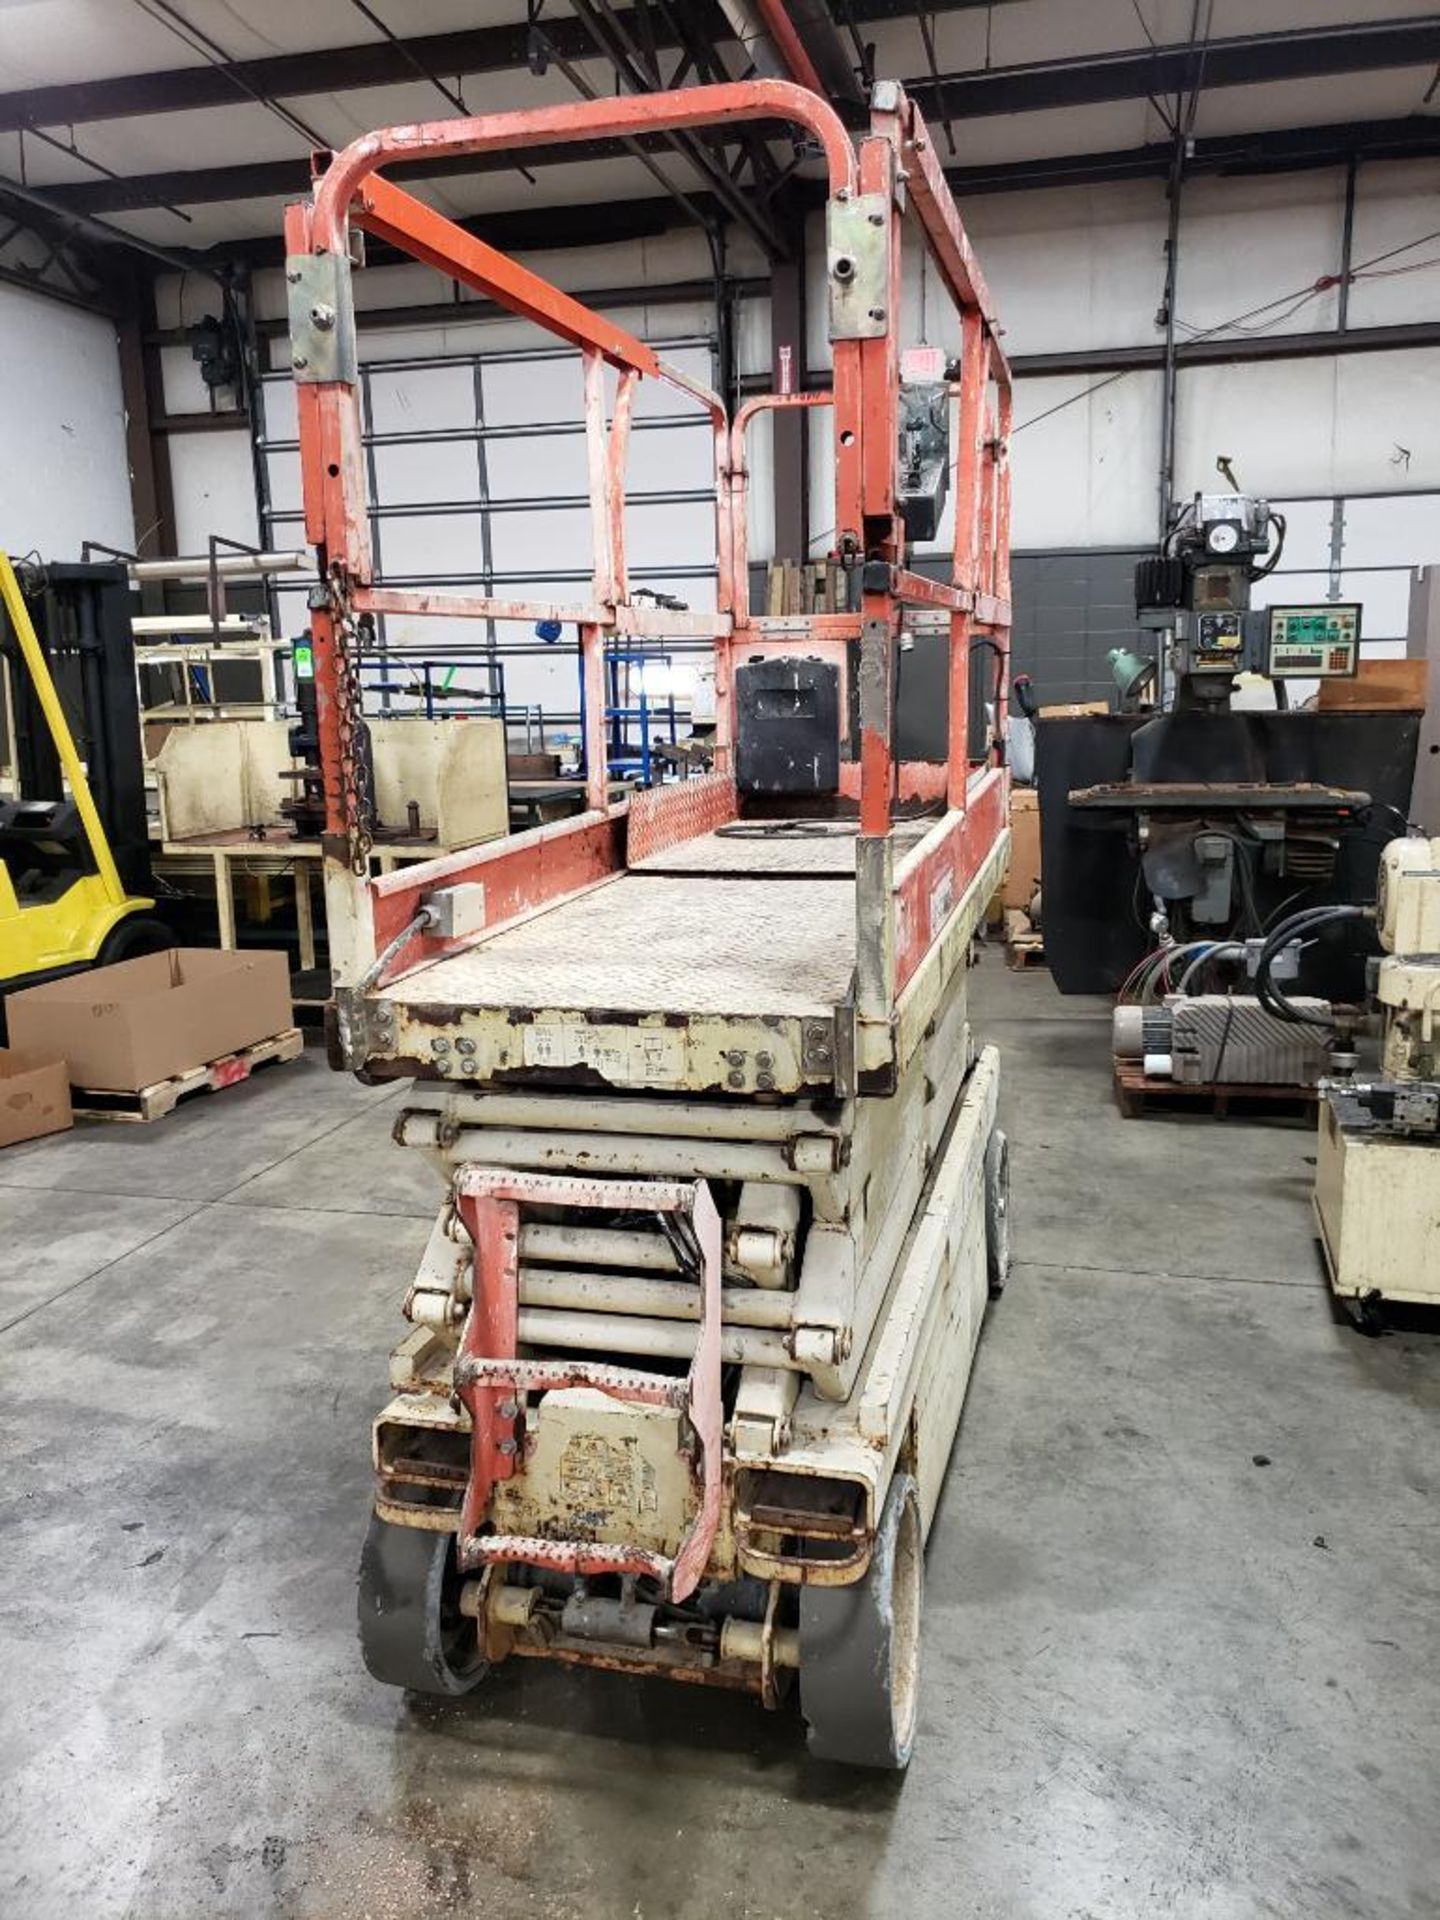 JLG Industries 2632E2 electric scissor lift. 26' lift 32" wide. YR 2003. Serial number 0200II2300. - Image 8 of 19